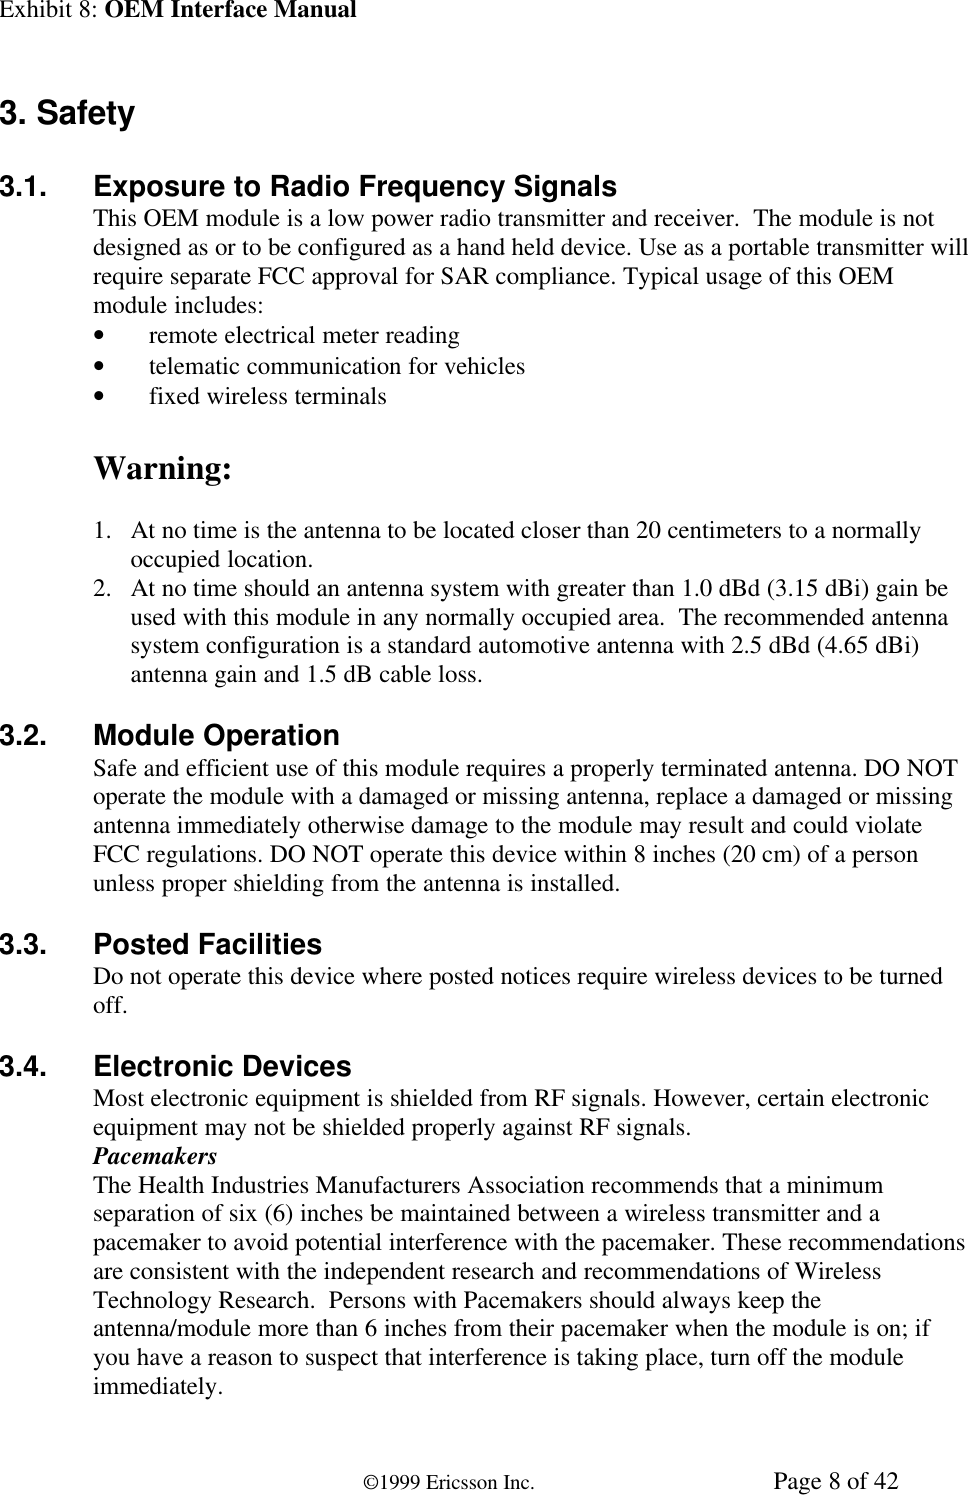 Exhibit 8: OEM Interface Manual©1999 Ericsson Inc. Page 8 of 423. Safety3.1. Exposure to Radio Frequency SignalsThis OEM module is a low power radio transmitter and receiver.  The module is notdesigned as or to be configured as a hand held device. Use as a portable transmitter willrequire separate FCC approval for SAR compliance. Typical usage of this OEMmodule includes:• remote electrical meter reading• telematic communication for vehicles• fixed wireless terminalsWarning:1. At no time is the antenna to be located closer than 20 centimeters to a normallyoccupied location.2. At no time should an antenna system with greater than 1.0 dBd (3.15 dBi) gain beused with this module in any normally occupied area.  The recommended antennasystem configuration is a standard automotive antenna with 2.5 dBd (4.65 dBi)antenna gain and 1.5 dB cable loss.3.2. Module OperationSafe and efficient use of this module requires a properly terminated antenna. DO NOToperate the module with a damaged or missing antenna, replace a damaged or missingantenna immediately otherwise damage to the module may result and could violateFCC regulations. DO NOT operate this device within 8 inches (20 cm) of a personunless proper shielding from the antenna is installed.3.3. Posted FacilitiesDo not operate this device where posted notices require wireless devices to be turnedoff.3.4. Electronic DevicesMost electronic equipment is shielded from RF signals. However, certain electronicequipment may not be shielded properly against RF signals.PacemakersThe Health Industries Manufacturers Association recommends that a minimumseparation of six (6) inches be maintained between a wireless transmitter and apacemaker to avoid potential interference with the pacemaker. These recommendationsare consistent with the independent research and recommendations of WirelessTechnology Research.  Persons with Pacemakers should always keep theantenna/module more than 6 inches from their pacemaker when the module is on; ifyou have a reason to suspect that interference is taking place, turn off the moduleimmediately.